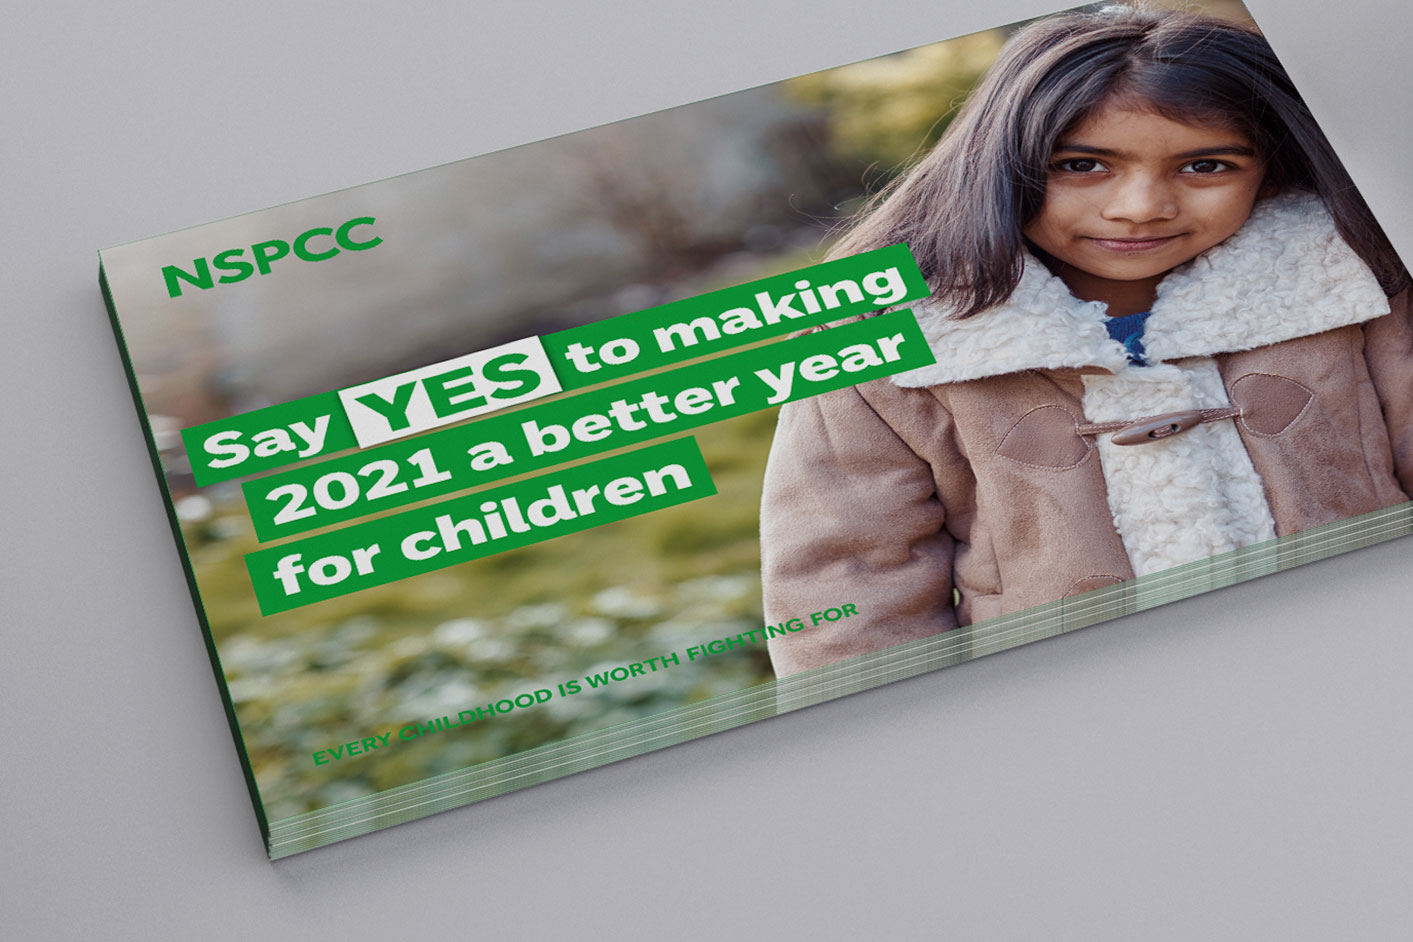 Image of outer envelope showing girl with headline "Say yes to making 2021 a better year for children"